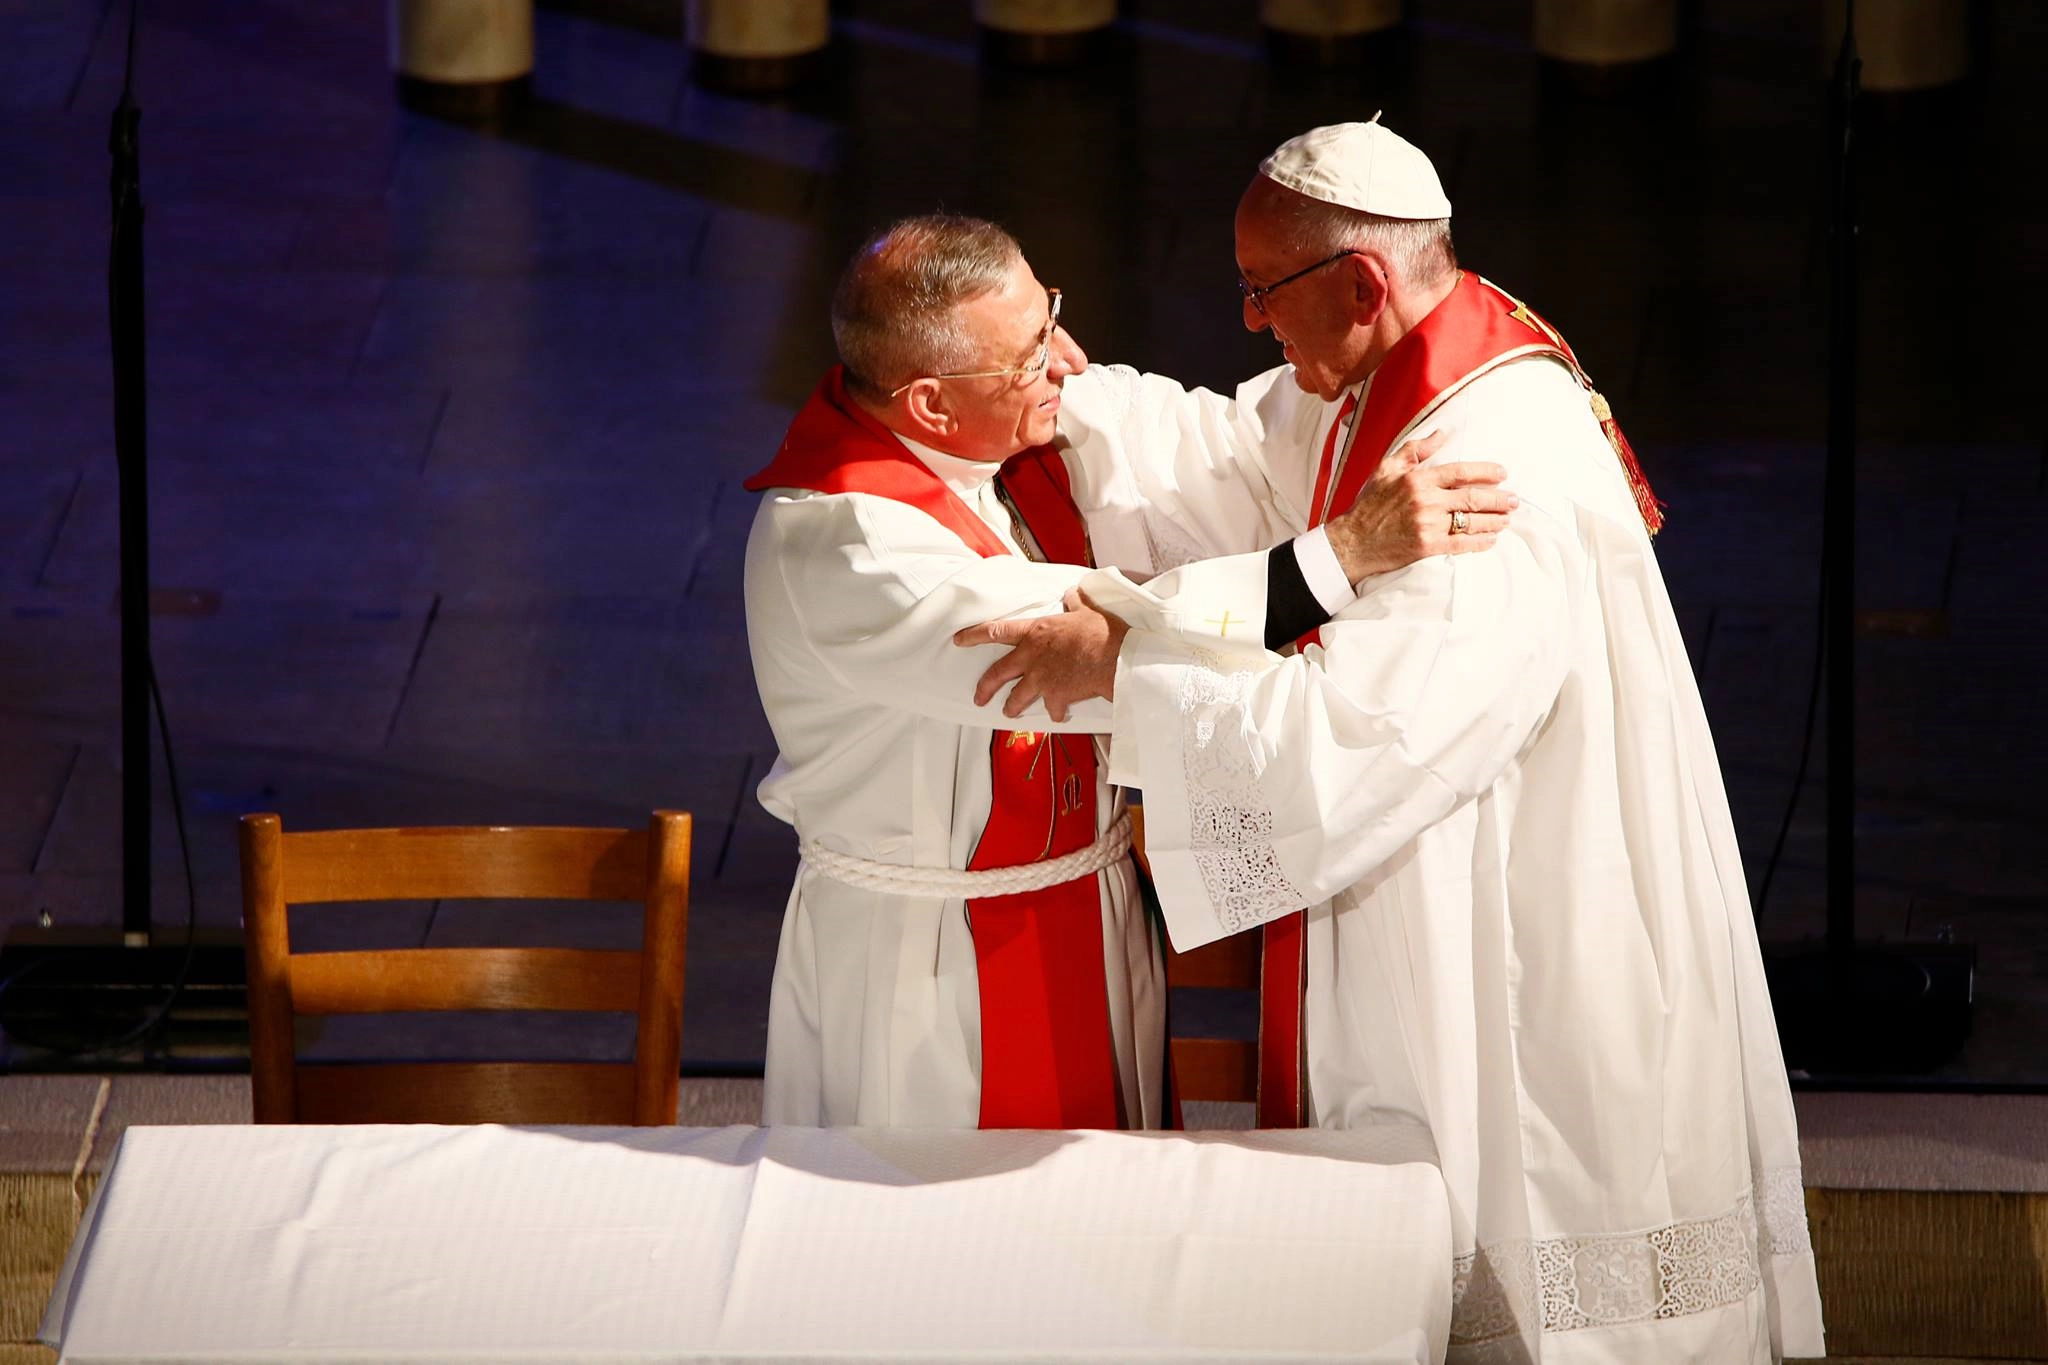 Rev Mounib Younan and Pope Francis embrace during the ecumencial service at Lund Cathedral